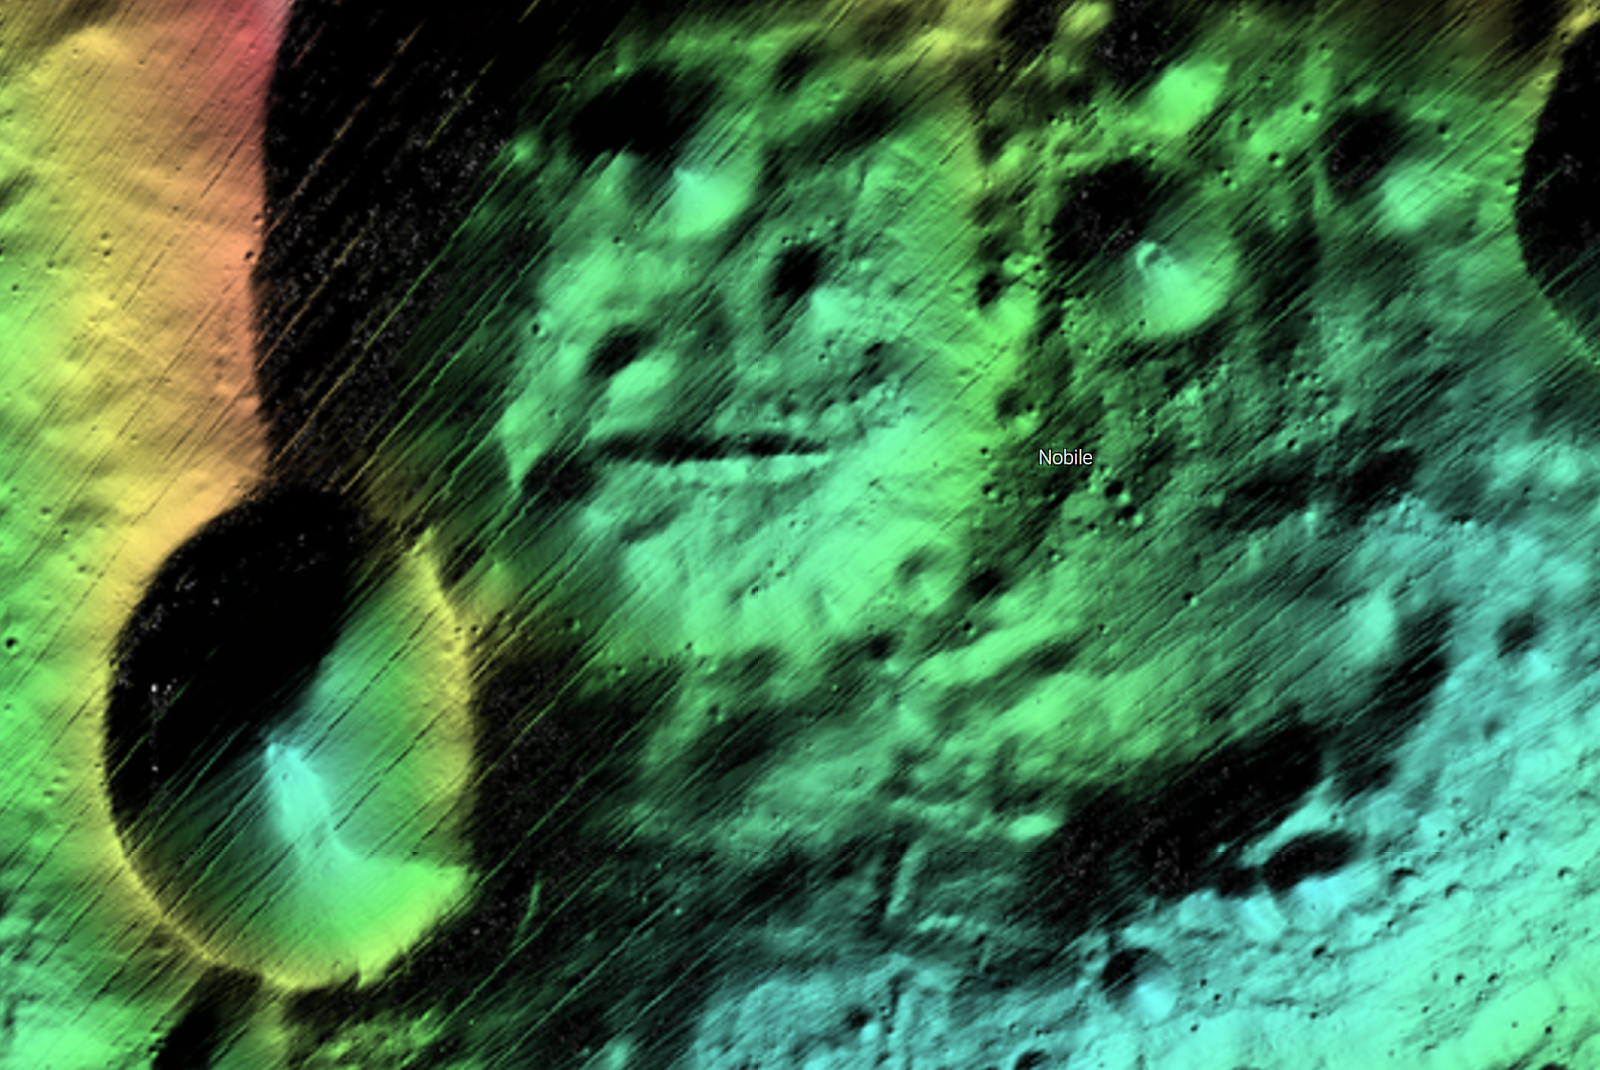 NASA is using Intel’s deep learning to find better landing sites on the moon